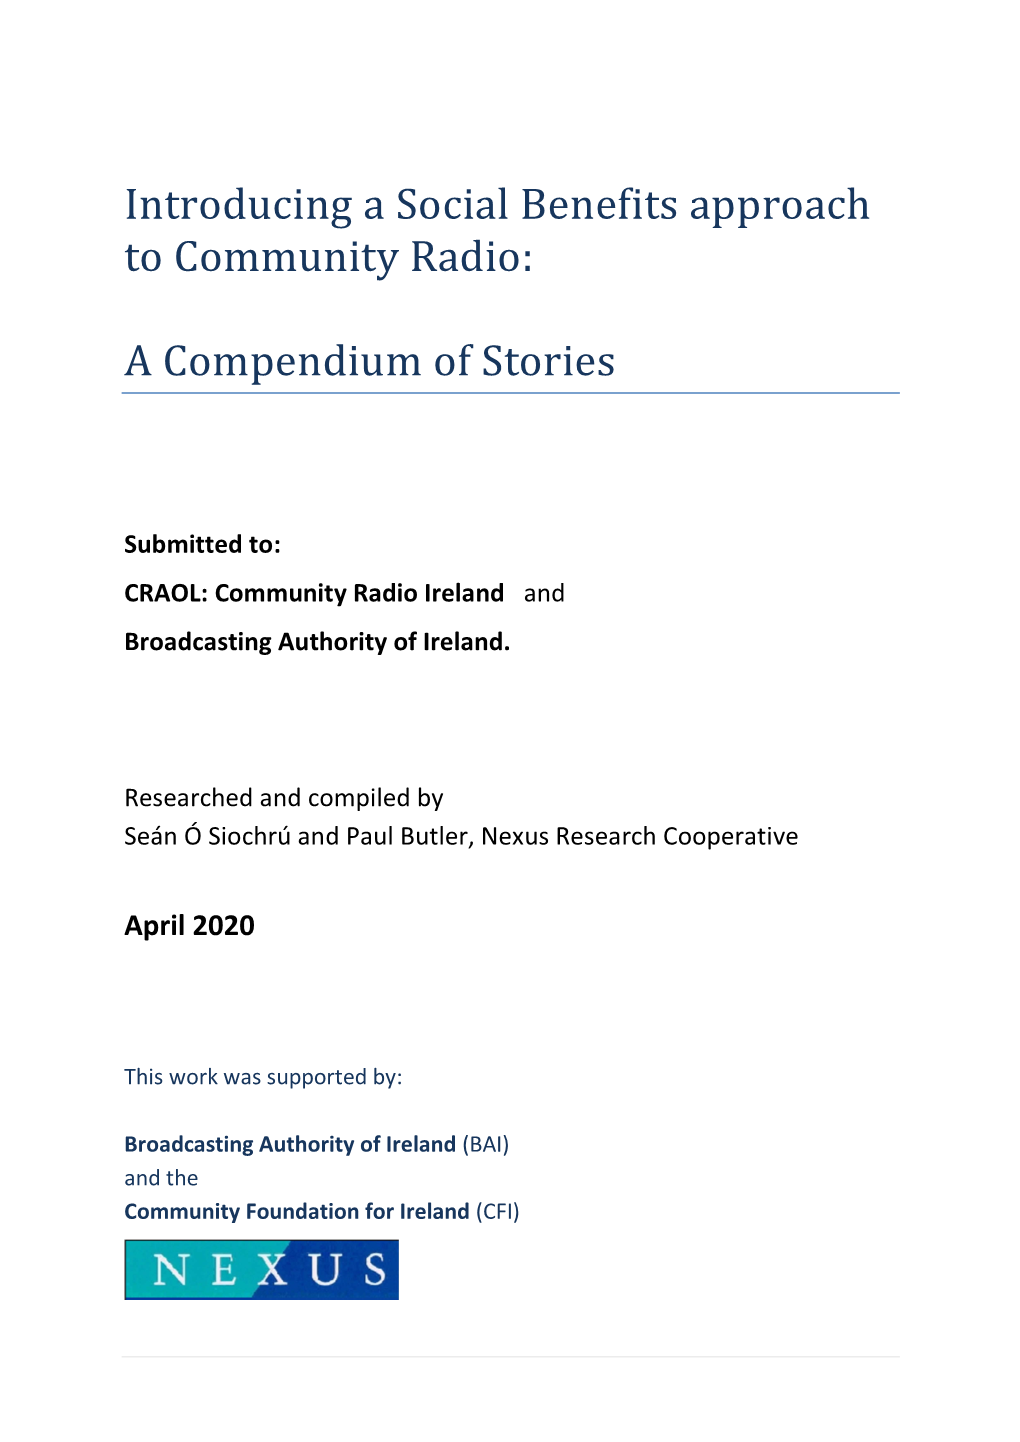 Introducing a Social Benefits Approach to Community Radio: A